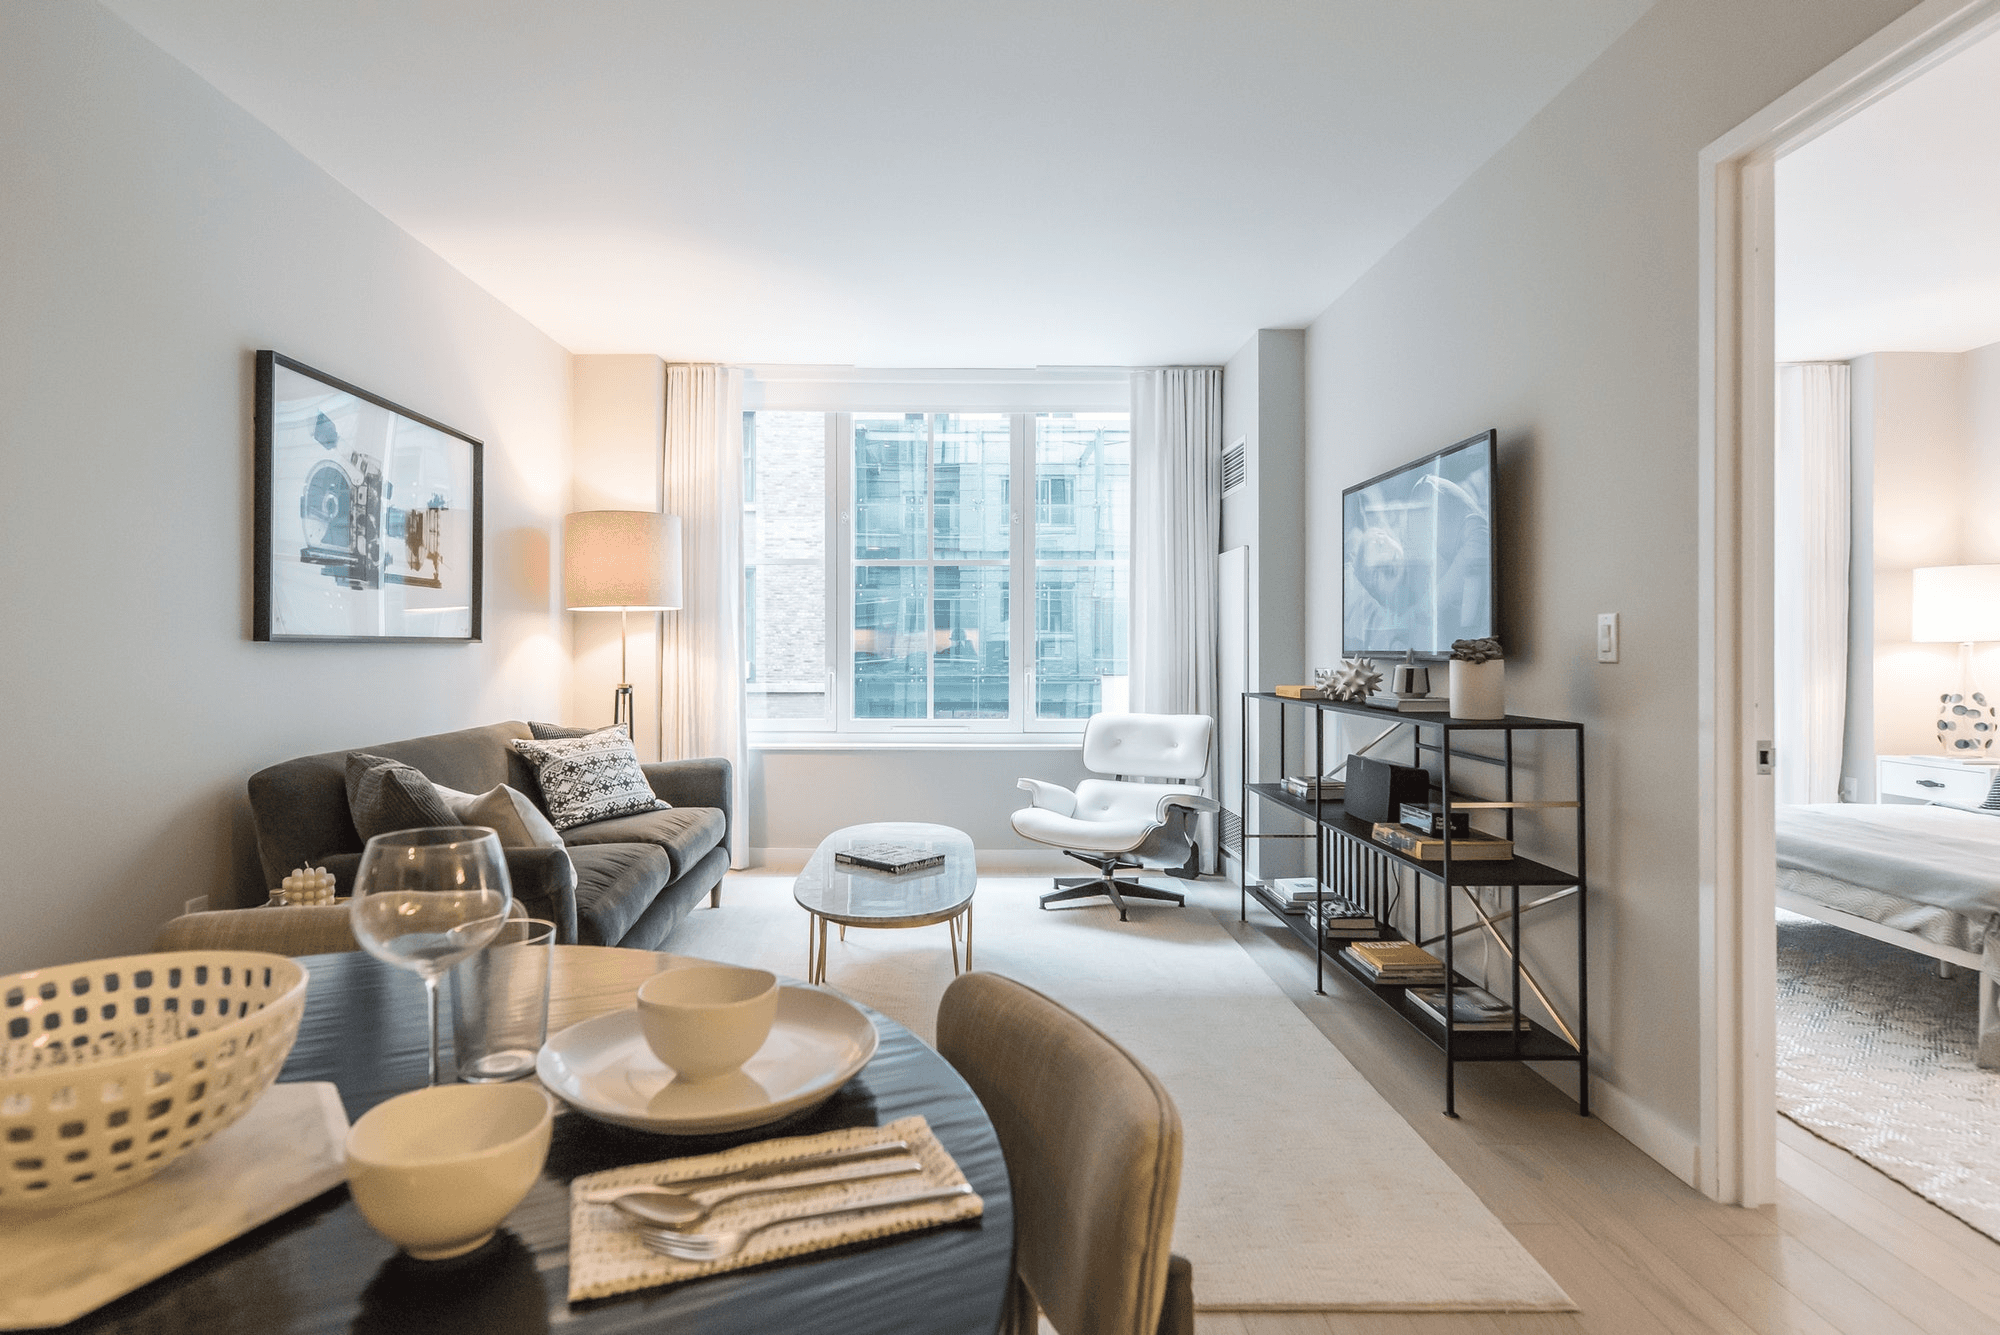 Very Large 2 Bedroom 2 Bathroom in the heart of Hell's Kitchen (Midtown West). Full Service Luxury Building with Doorman/Gym/Playroom, etc. *NO FEE*